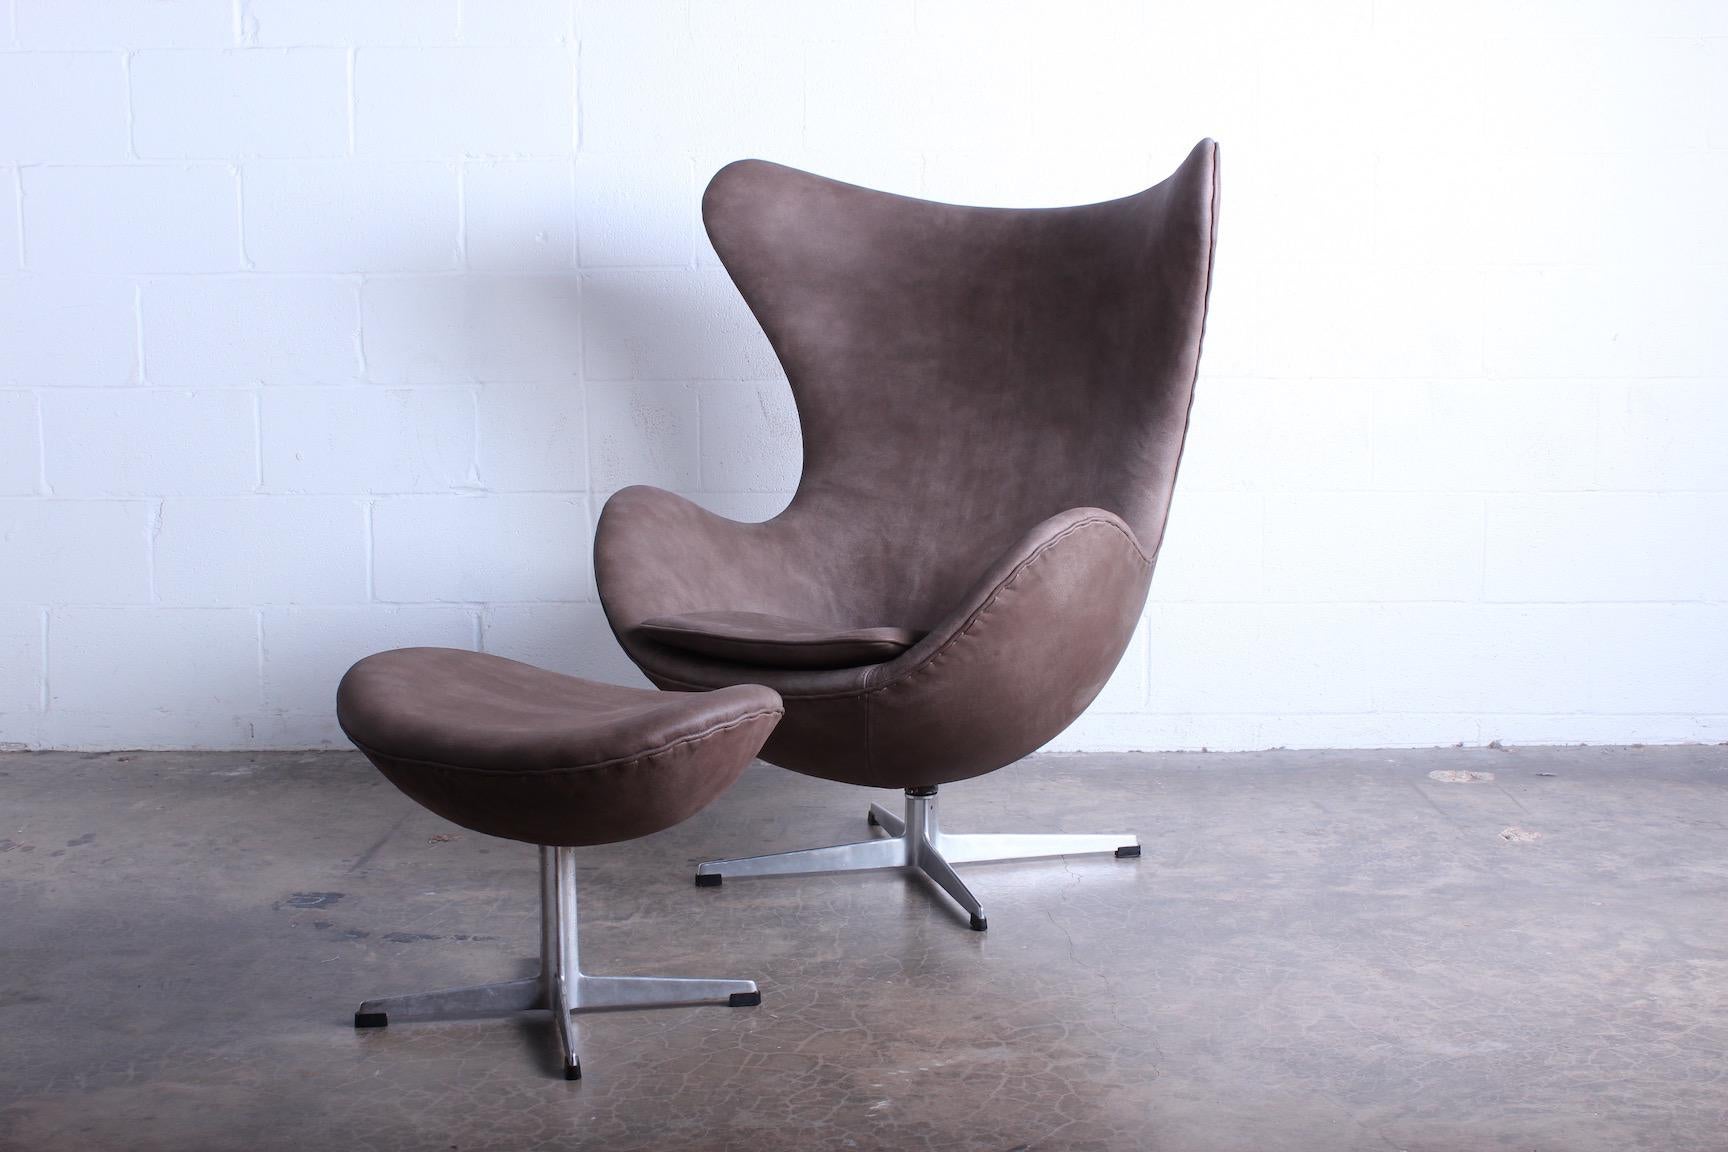 A leather egg chair and ottoman designed by Arne Jacobsen for Fritz Hansen.